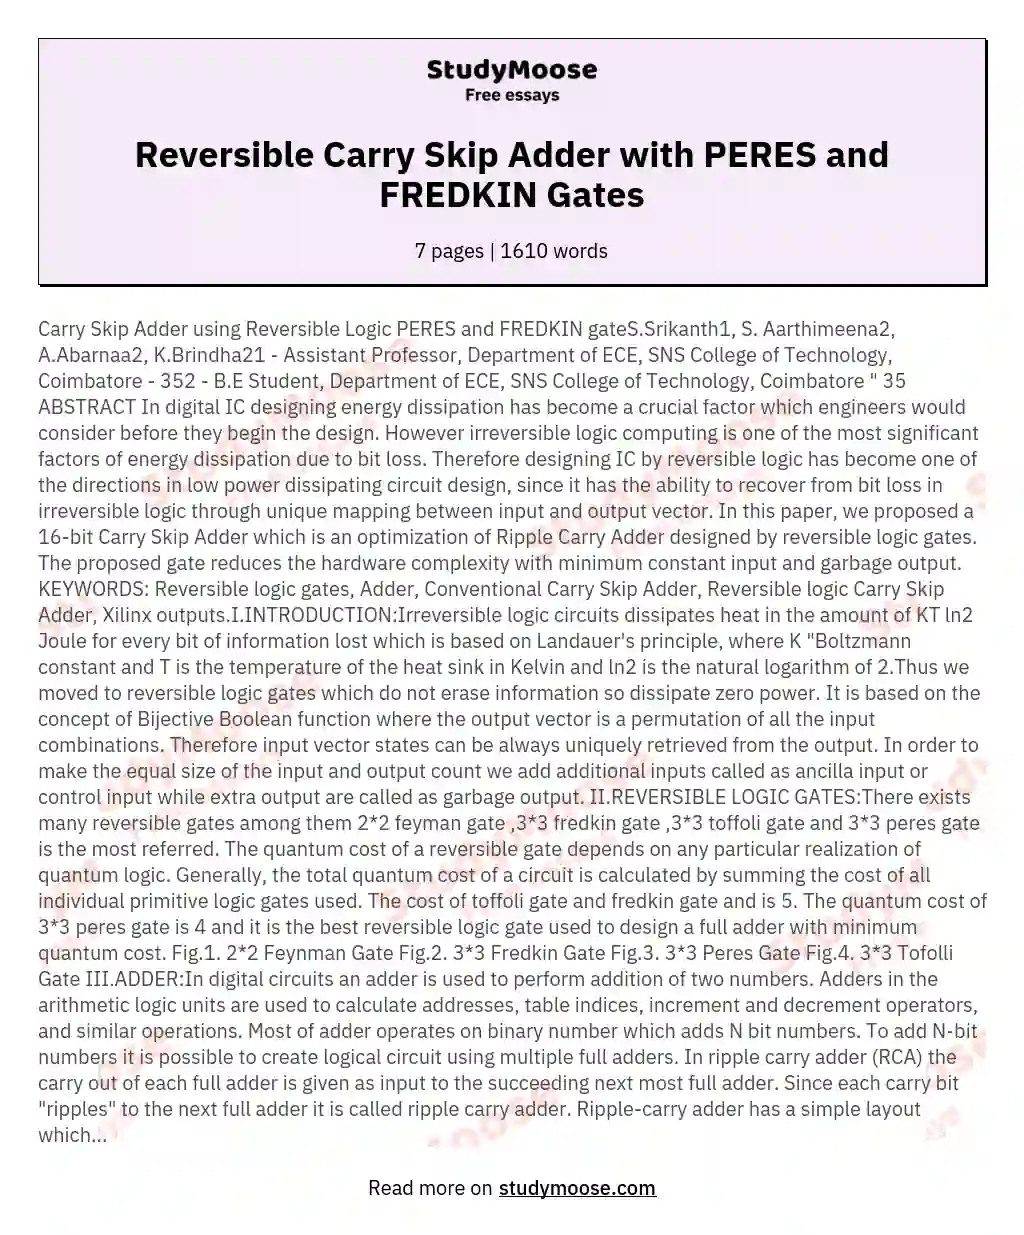 Reversible Carry Skip Adder with PERES and FREDKIN Gates essay